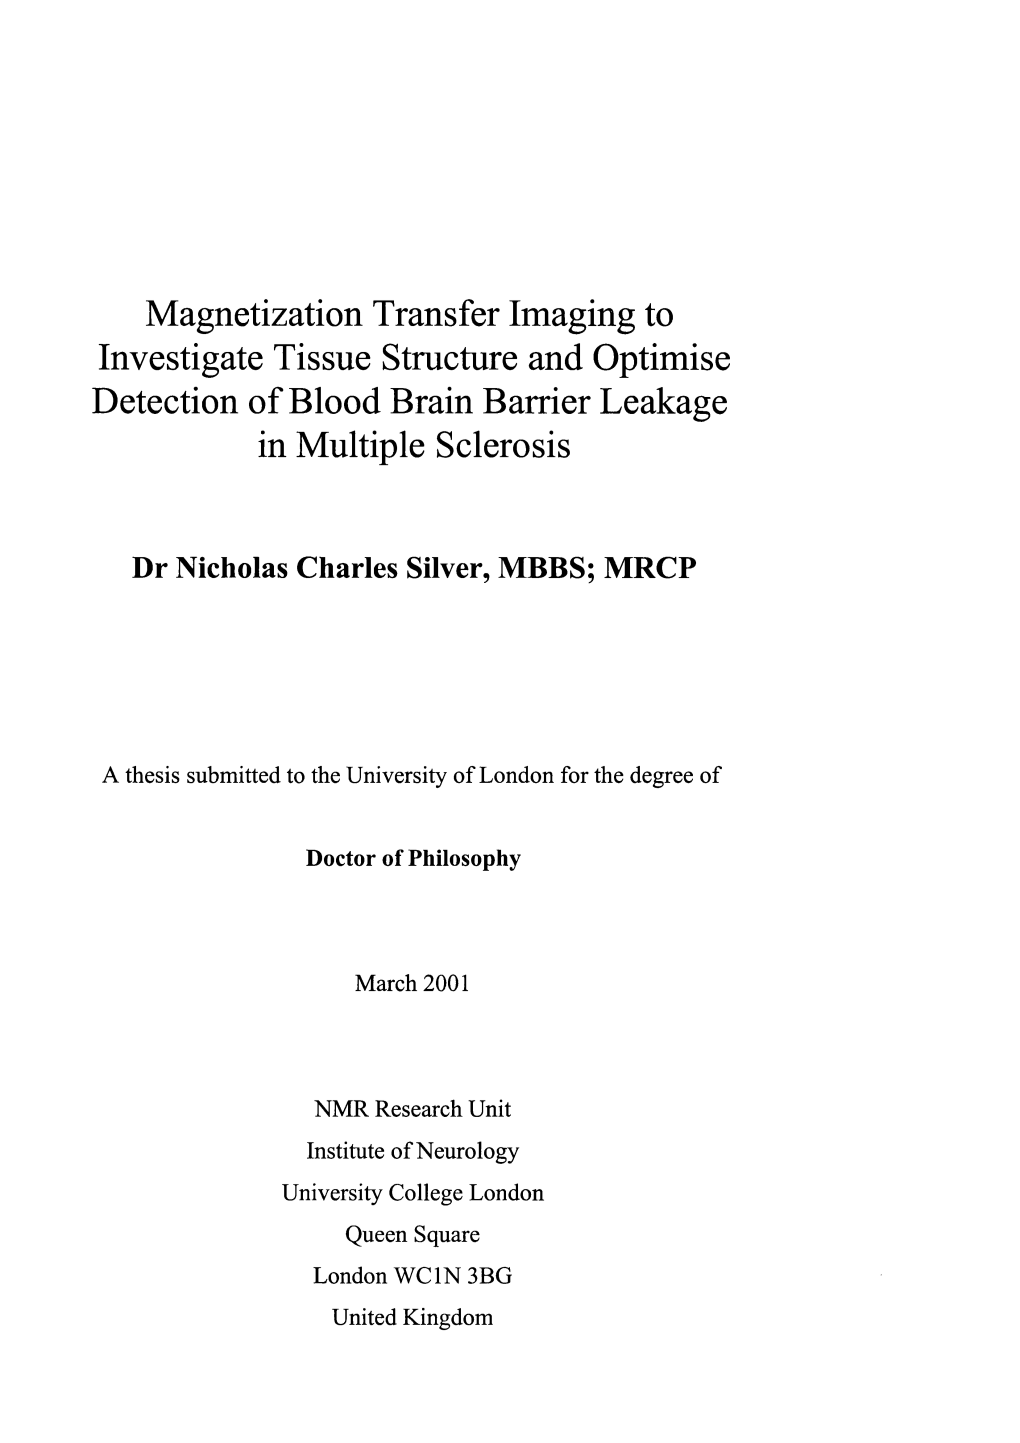 Magnetization Transfer Imaging to Investigate Tissue Structure and Optimise Detection of Blood Brain Barrier Leakage in Multiple Sclerosis